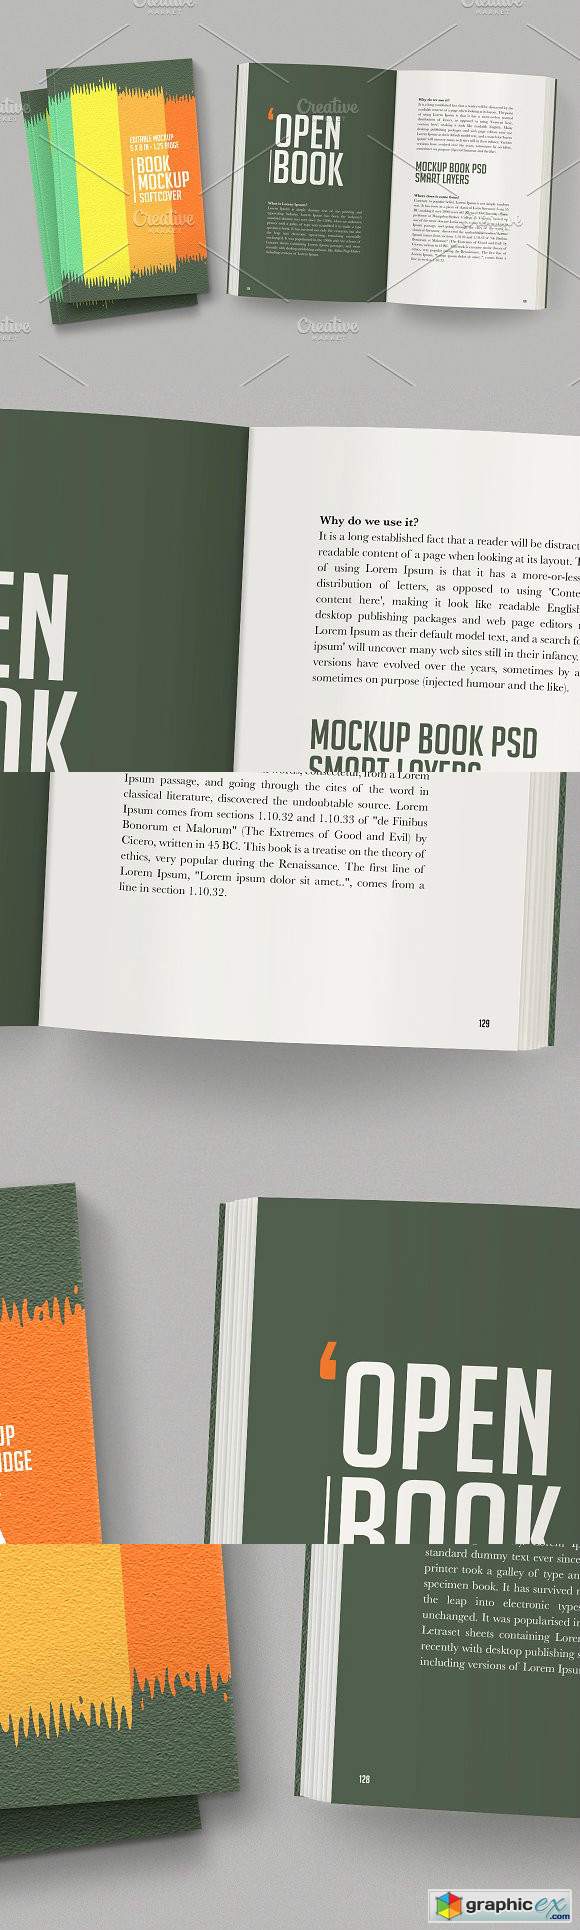 Open Softcover Book Mockup